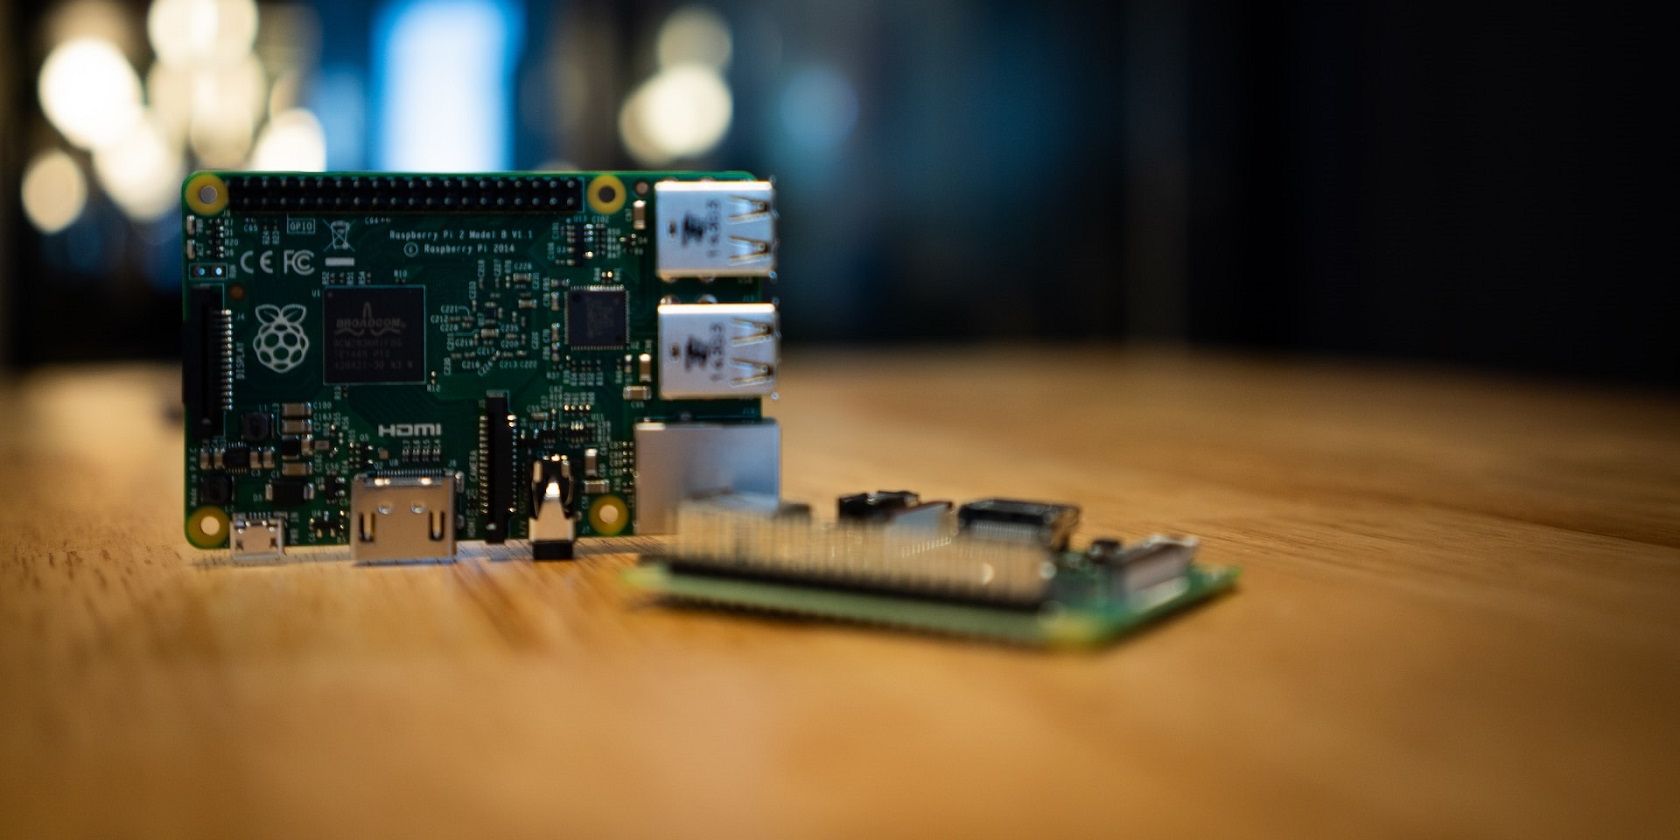 Two Raspberry Pi 2B boards on a wooden surface